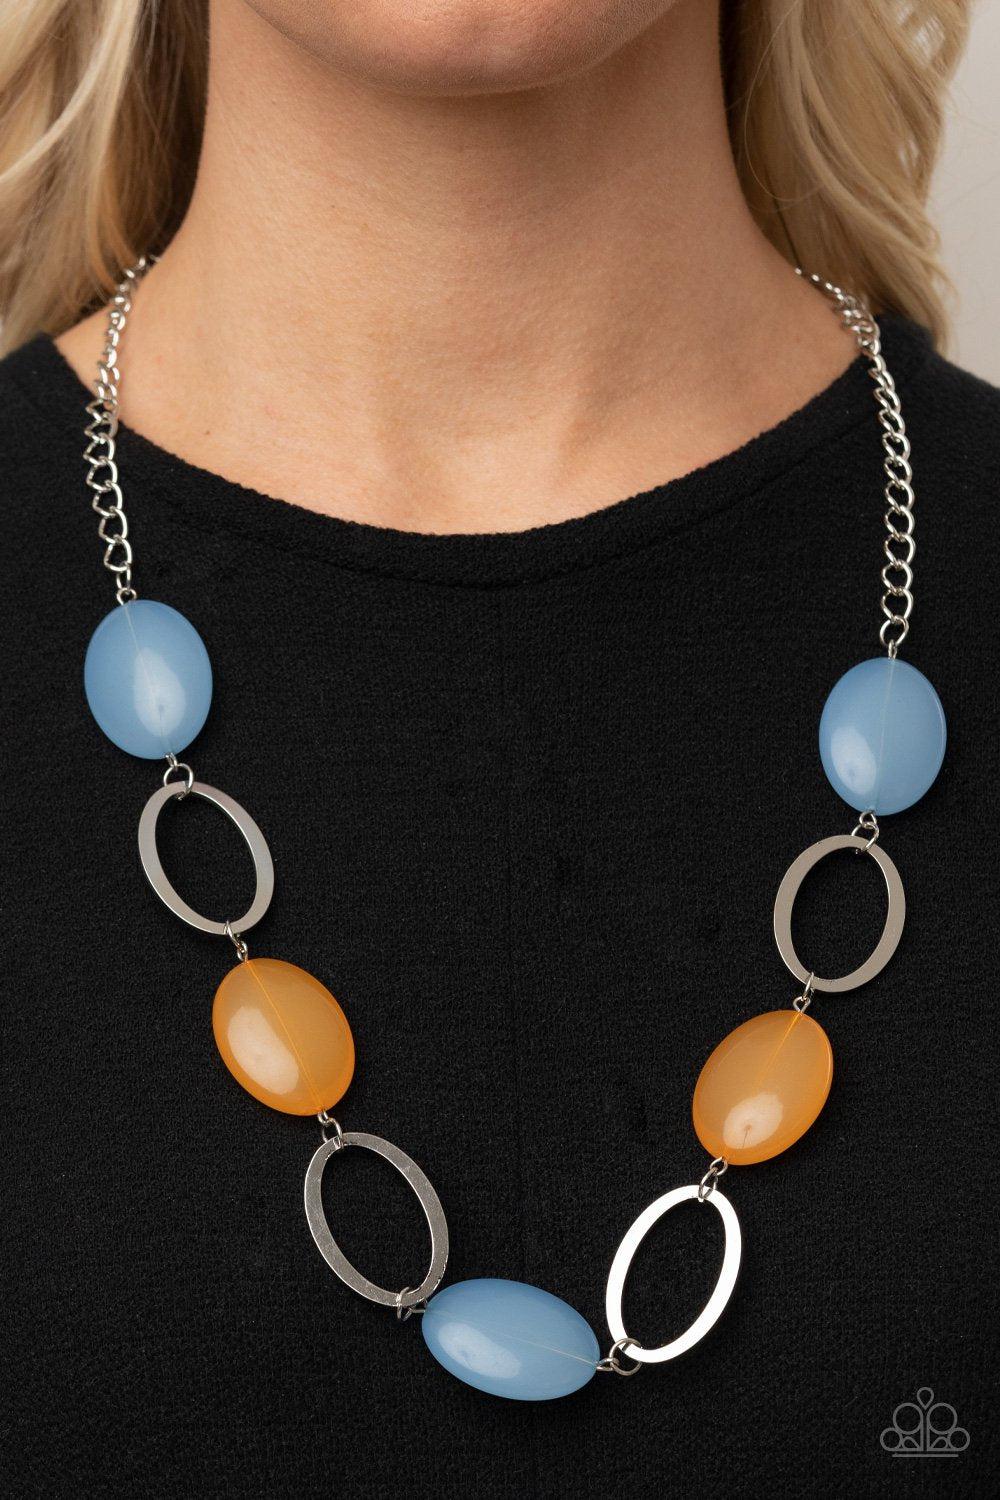 Beachside Boardwalk Multi-color Blue and Orange Necklace - Paparazzi Accessories- lightbox - CarasShop.com - $5 Jewelry by Cara Jewels